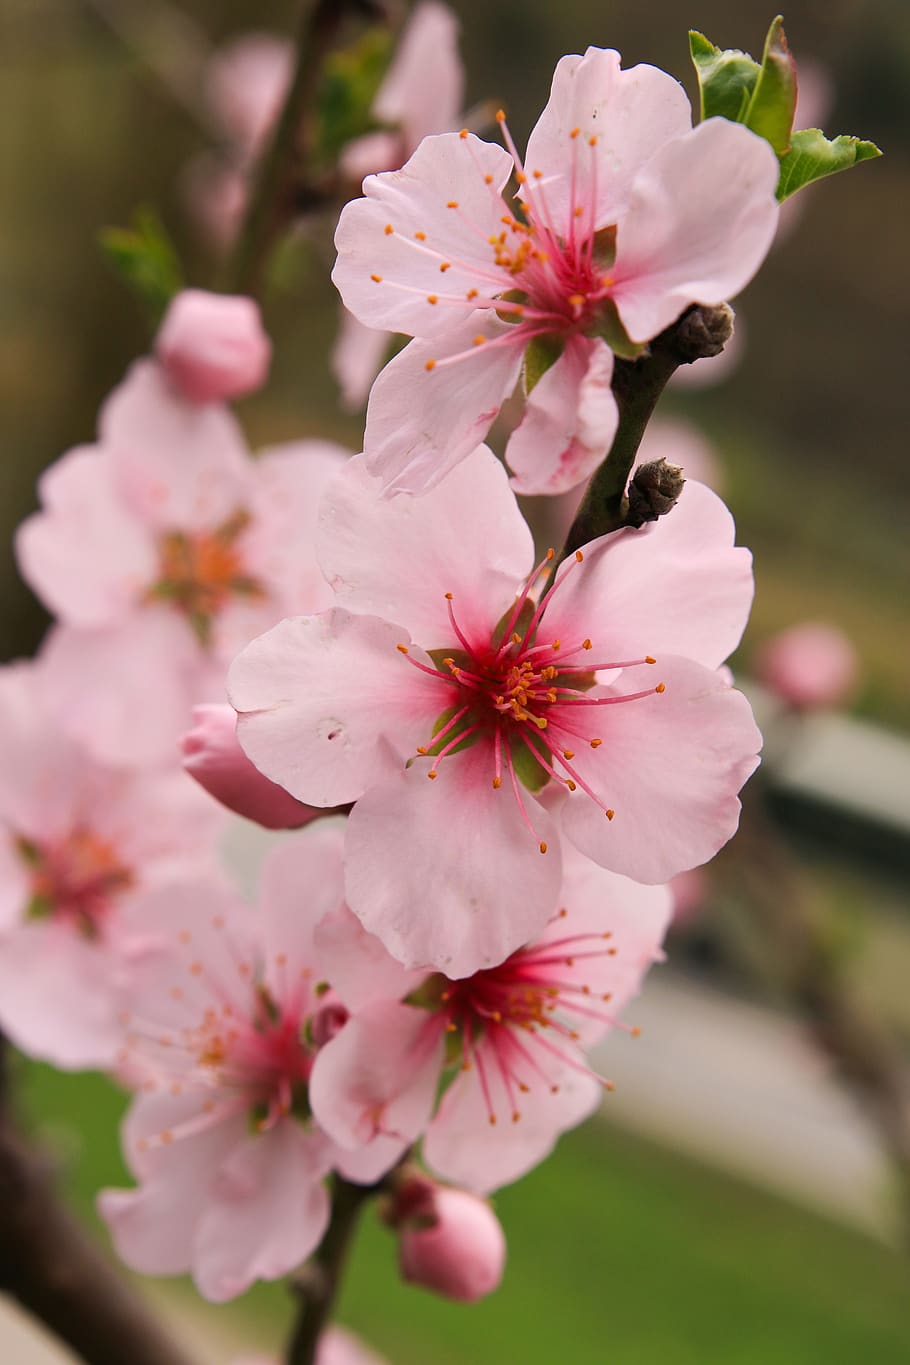 apple blossoms, flowers, pink, spring, bloom, close up, blossom, fruit tree, apple tree blossom, flowering plant